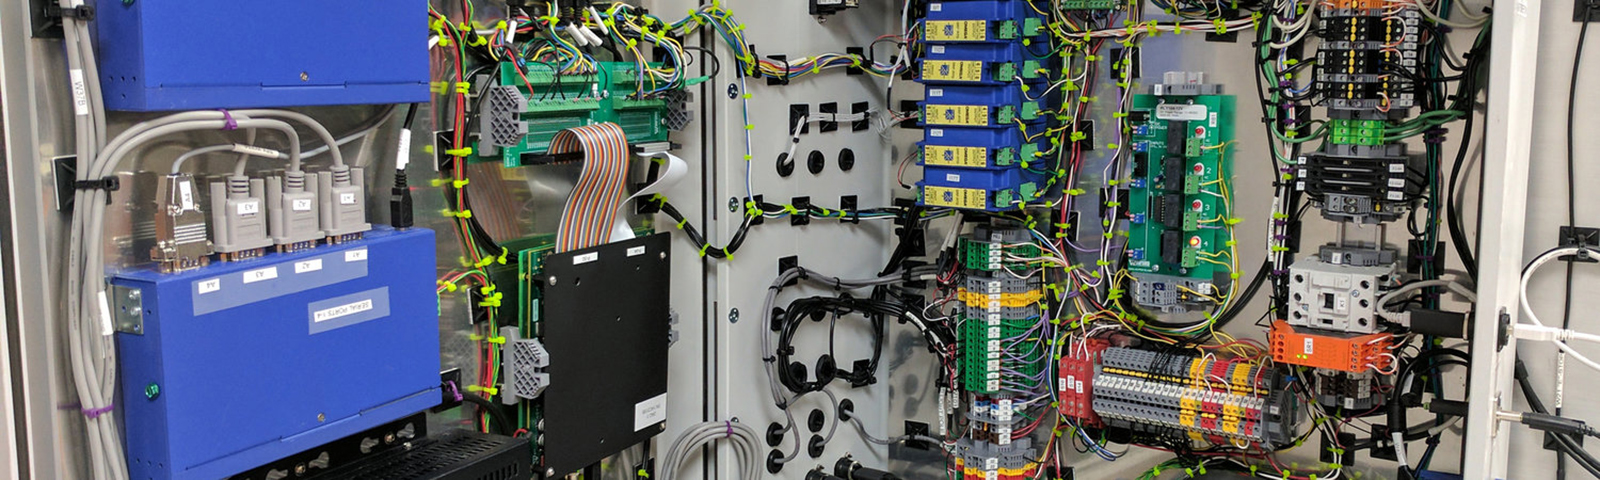 The control box for Dimien’s automated pilot scale manufacturing system.